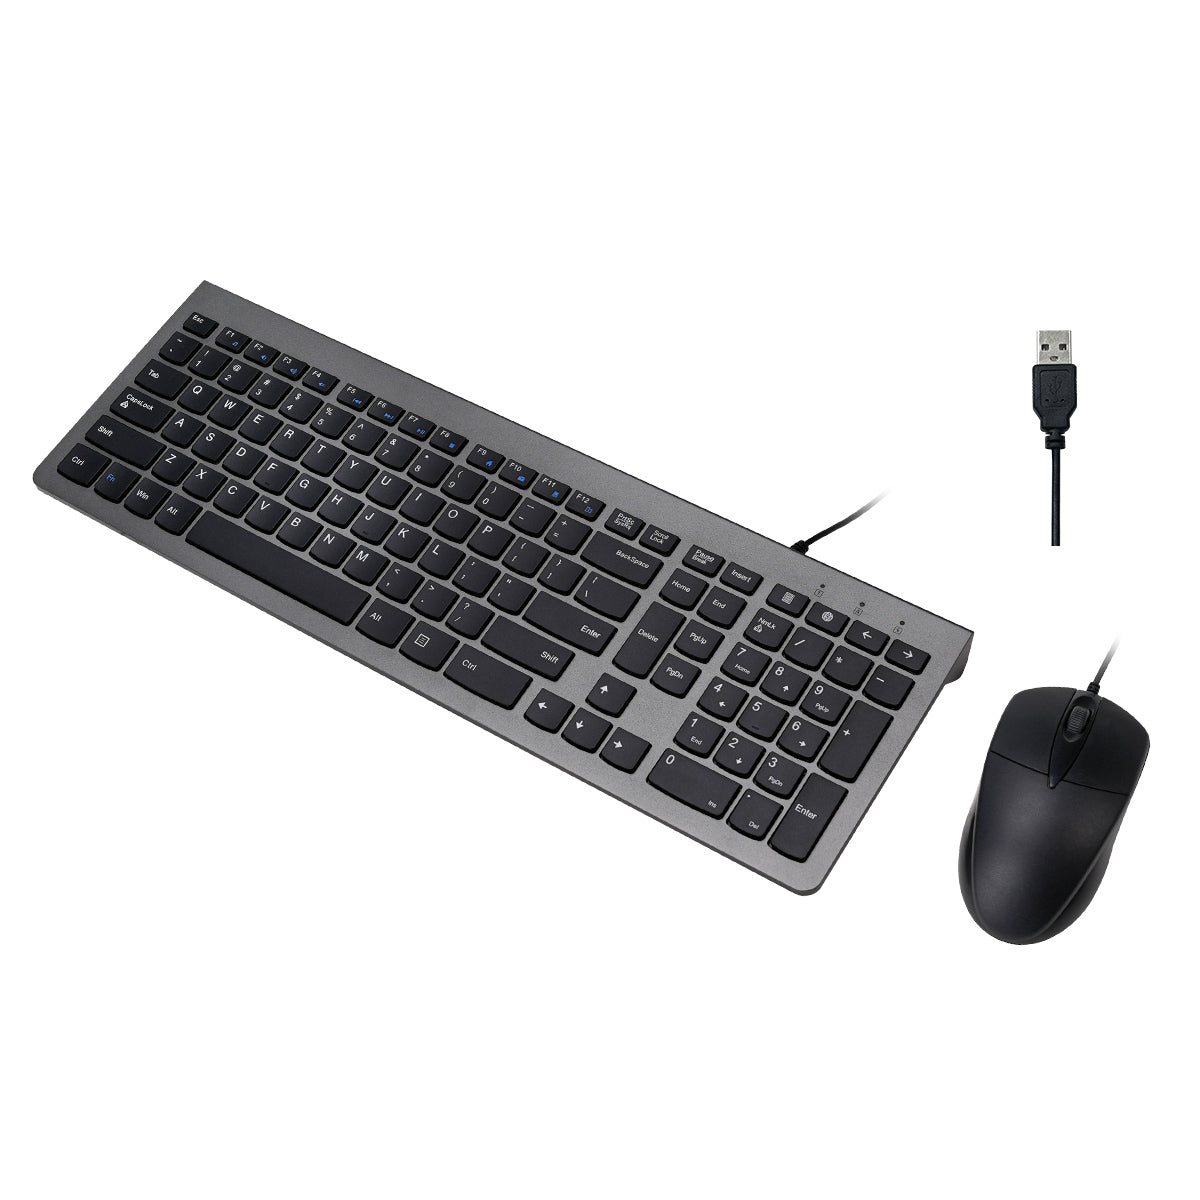 Well-designed lightweight 108 Keys Wired Keyboards Mouse Sets Combo Computer Mouse And Keyboard For Office work